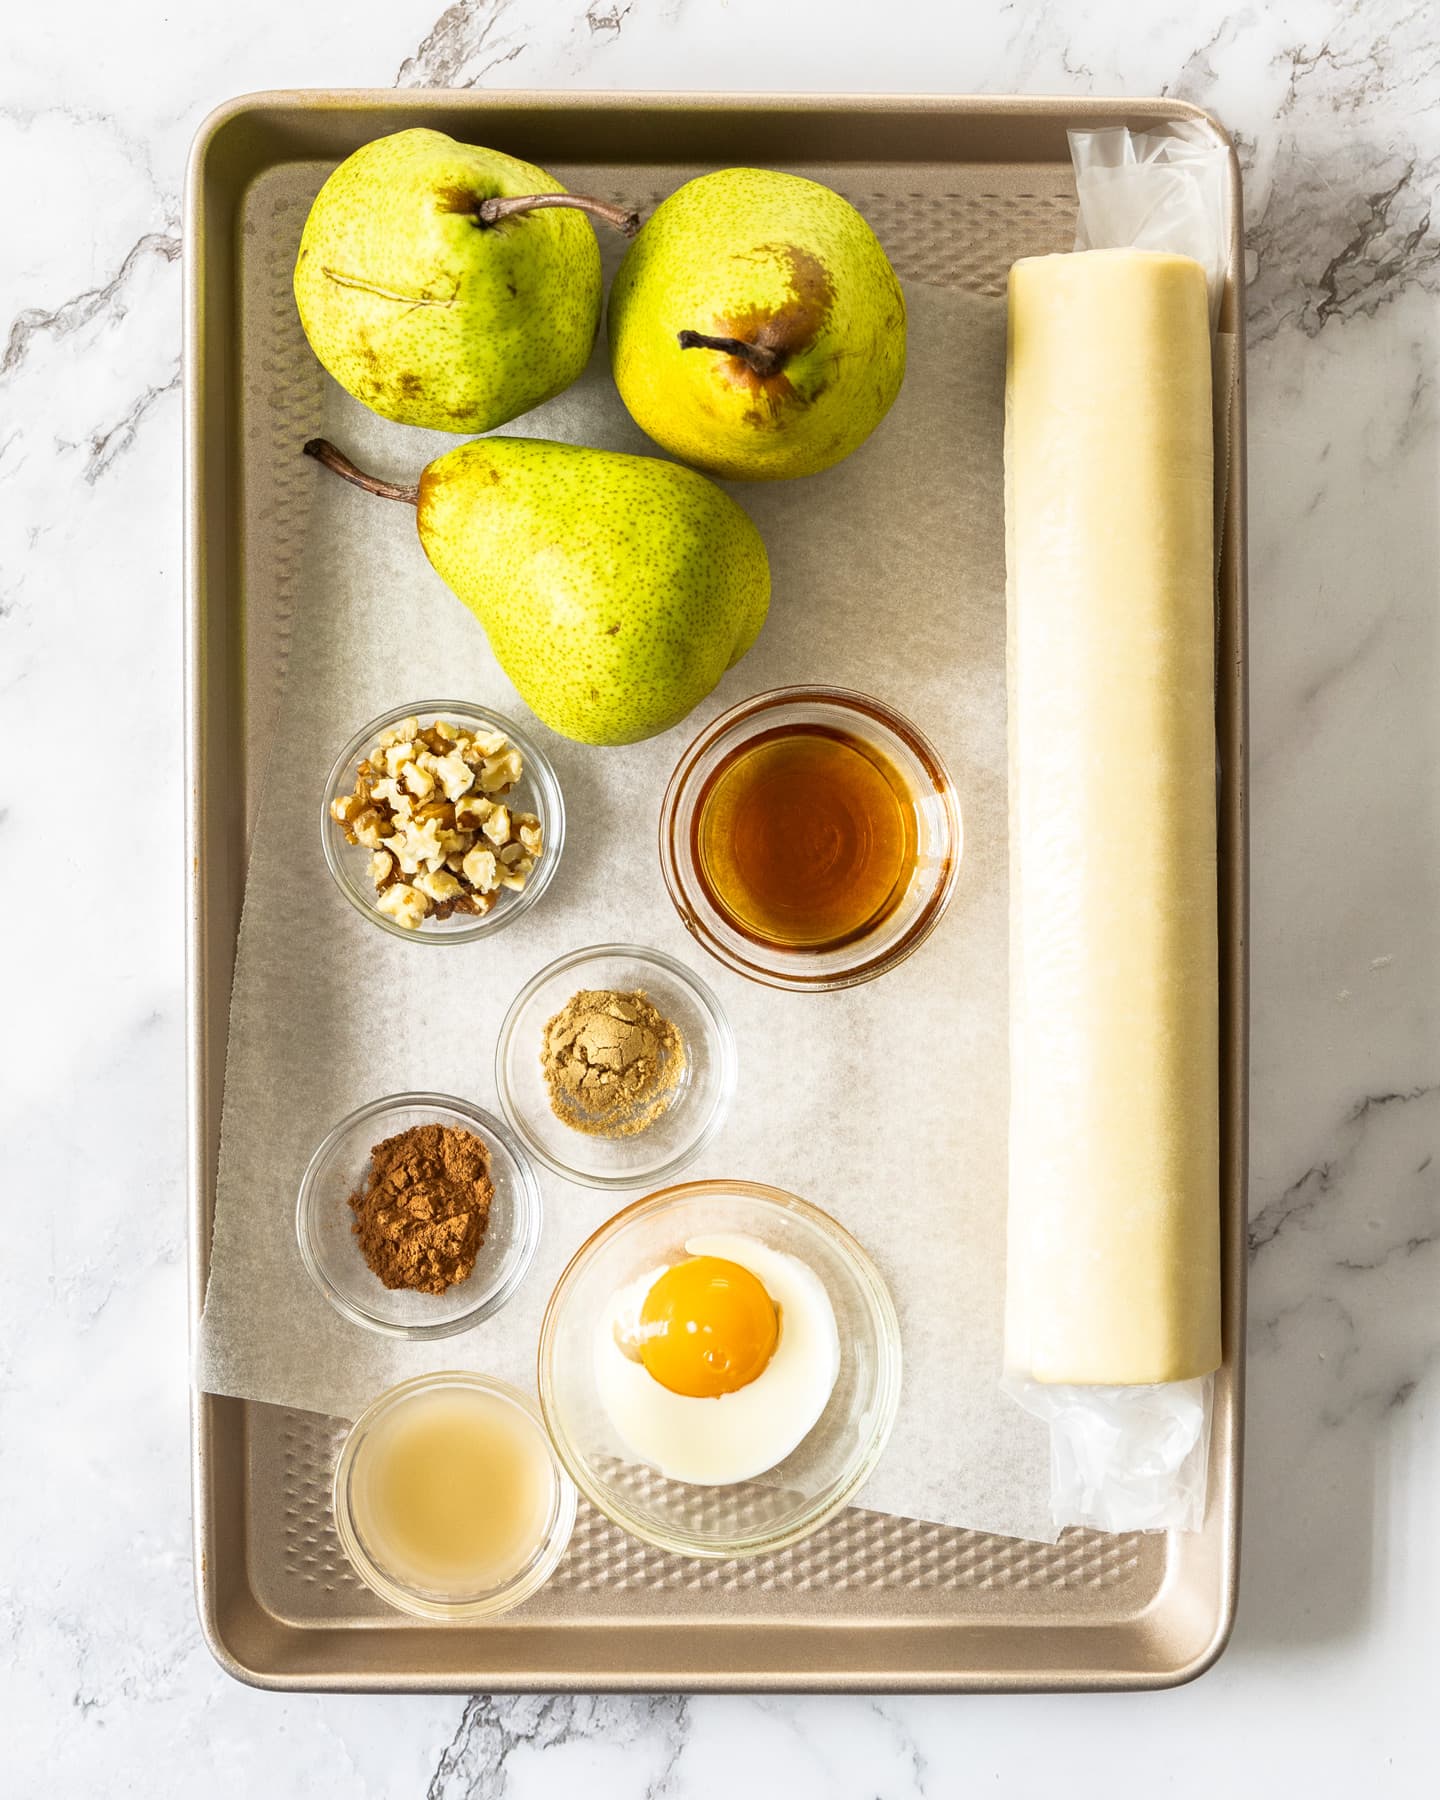 Ingredients for puff pastry pear tart.